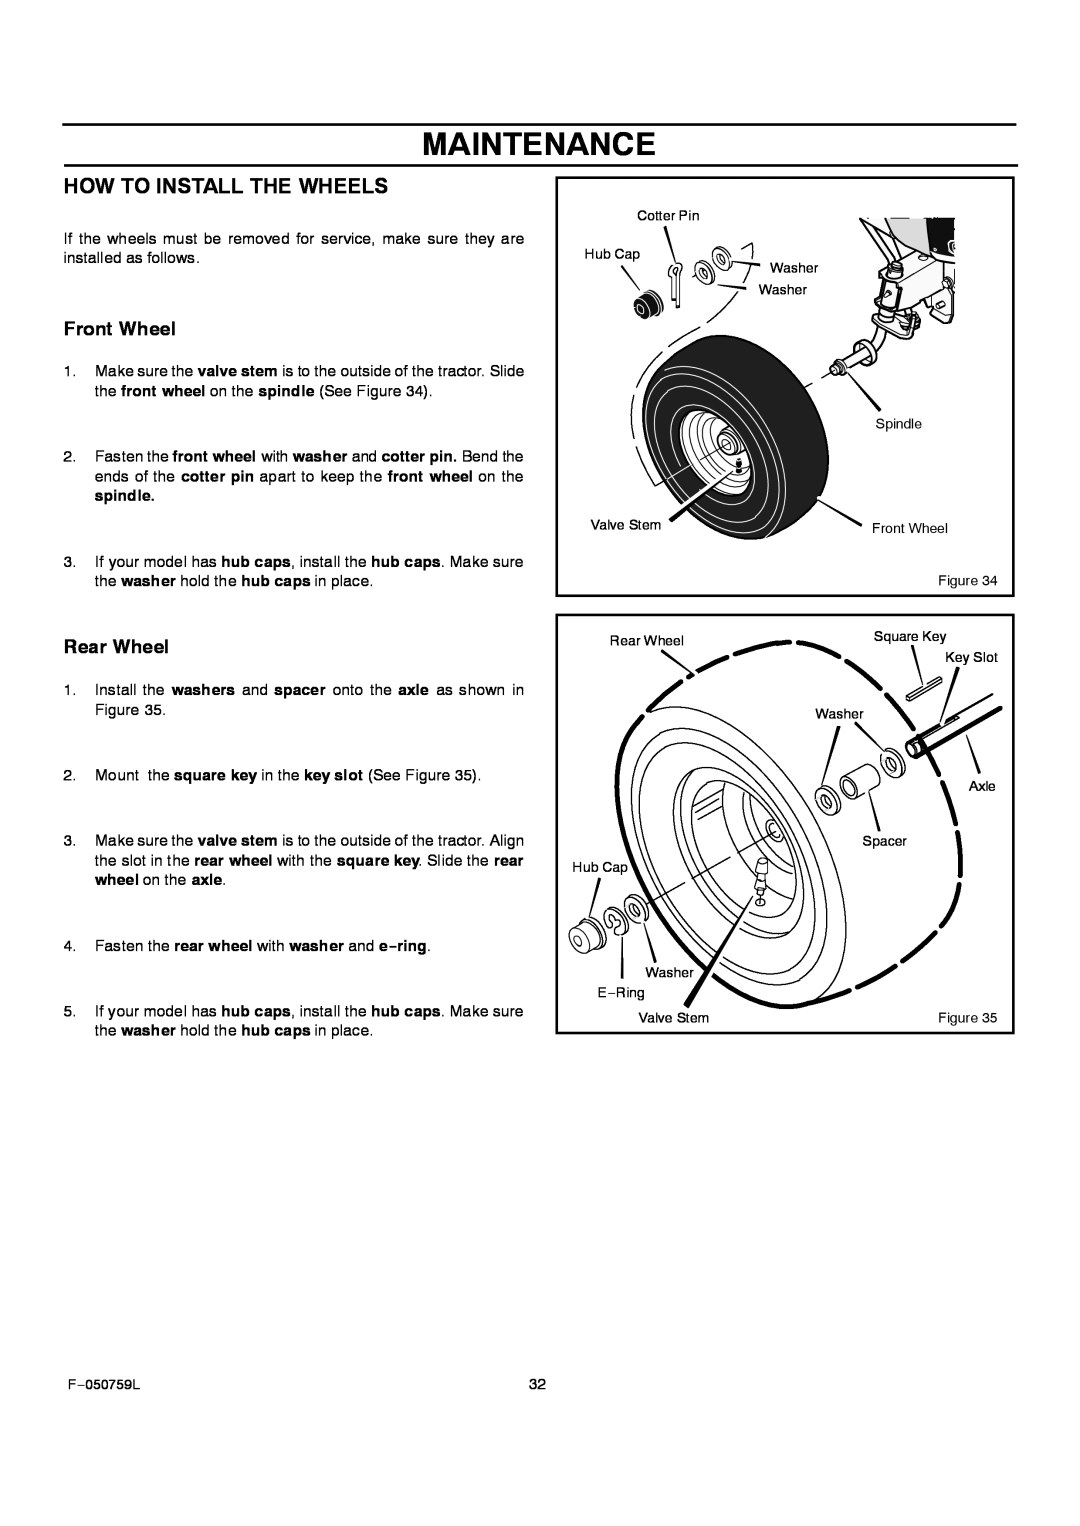 Rover 405012x108A owner manual How To Install The Wheels, Maintenance, Front Wheel, Rear Wheel 